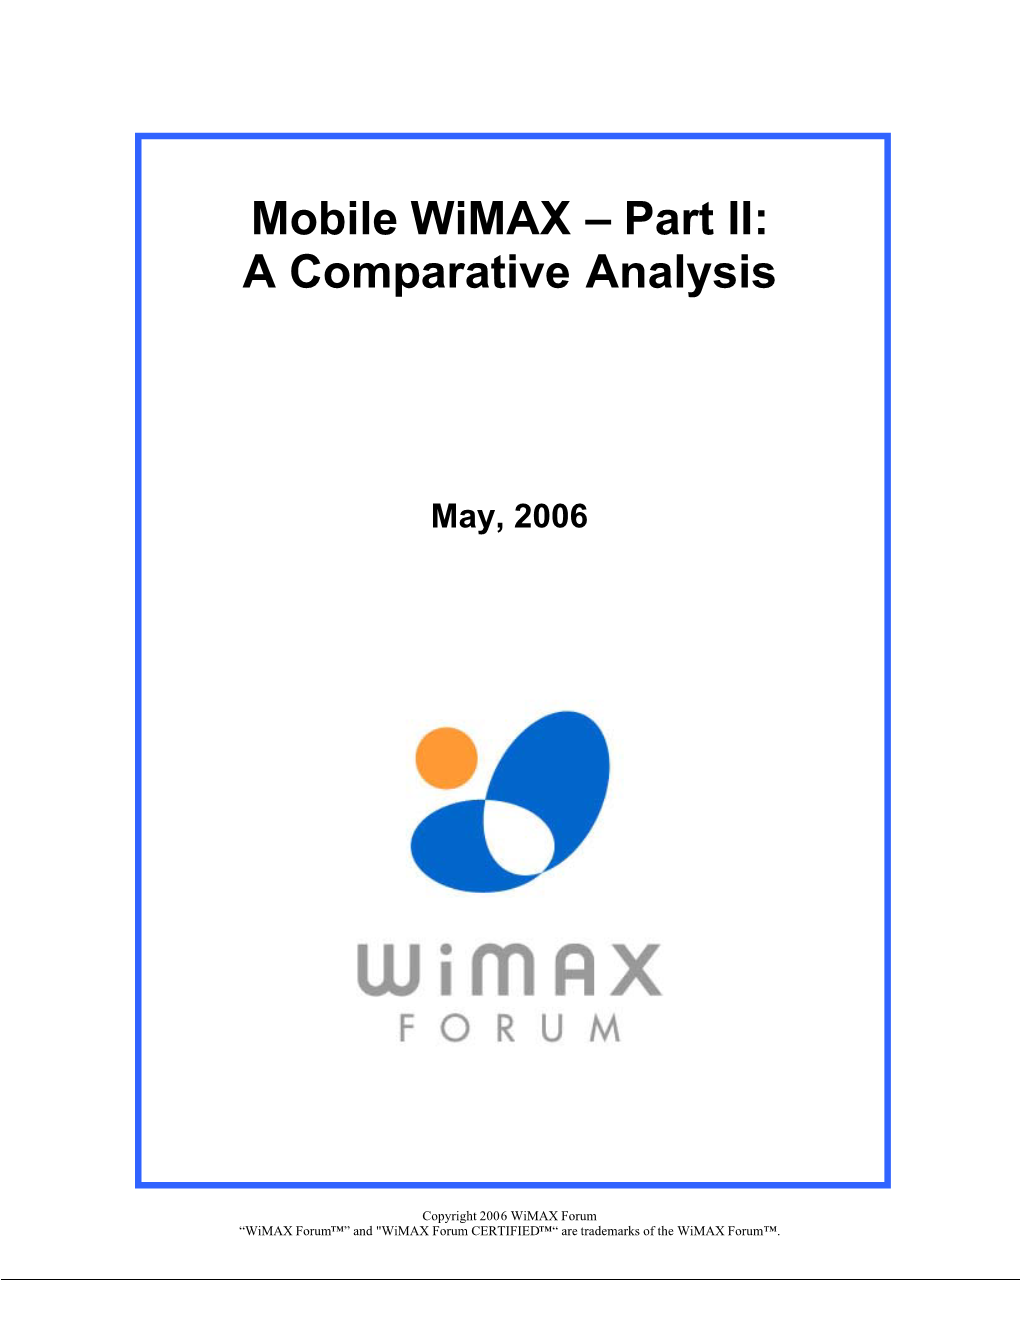 Mobile Wimax – Part II: a Comparative Analysis